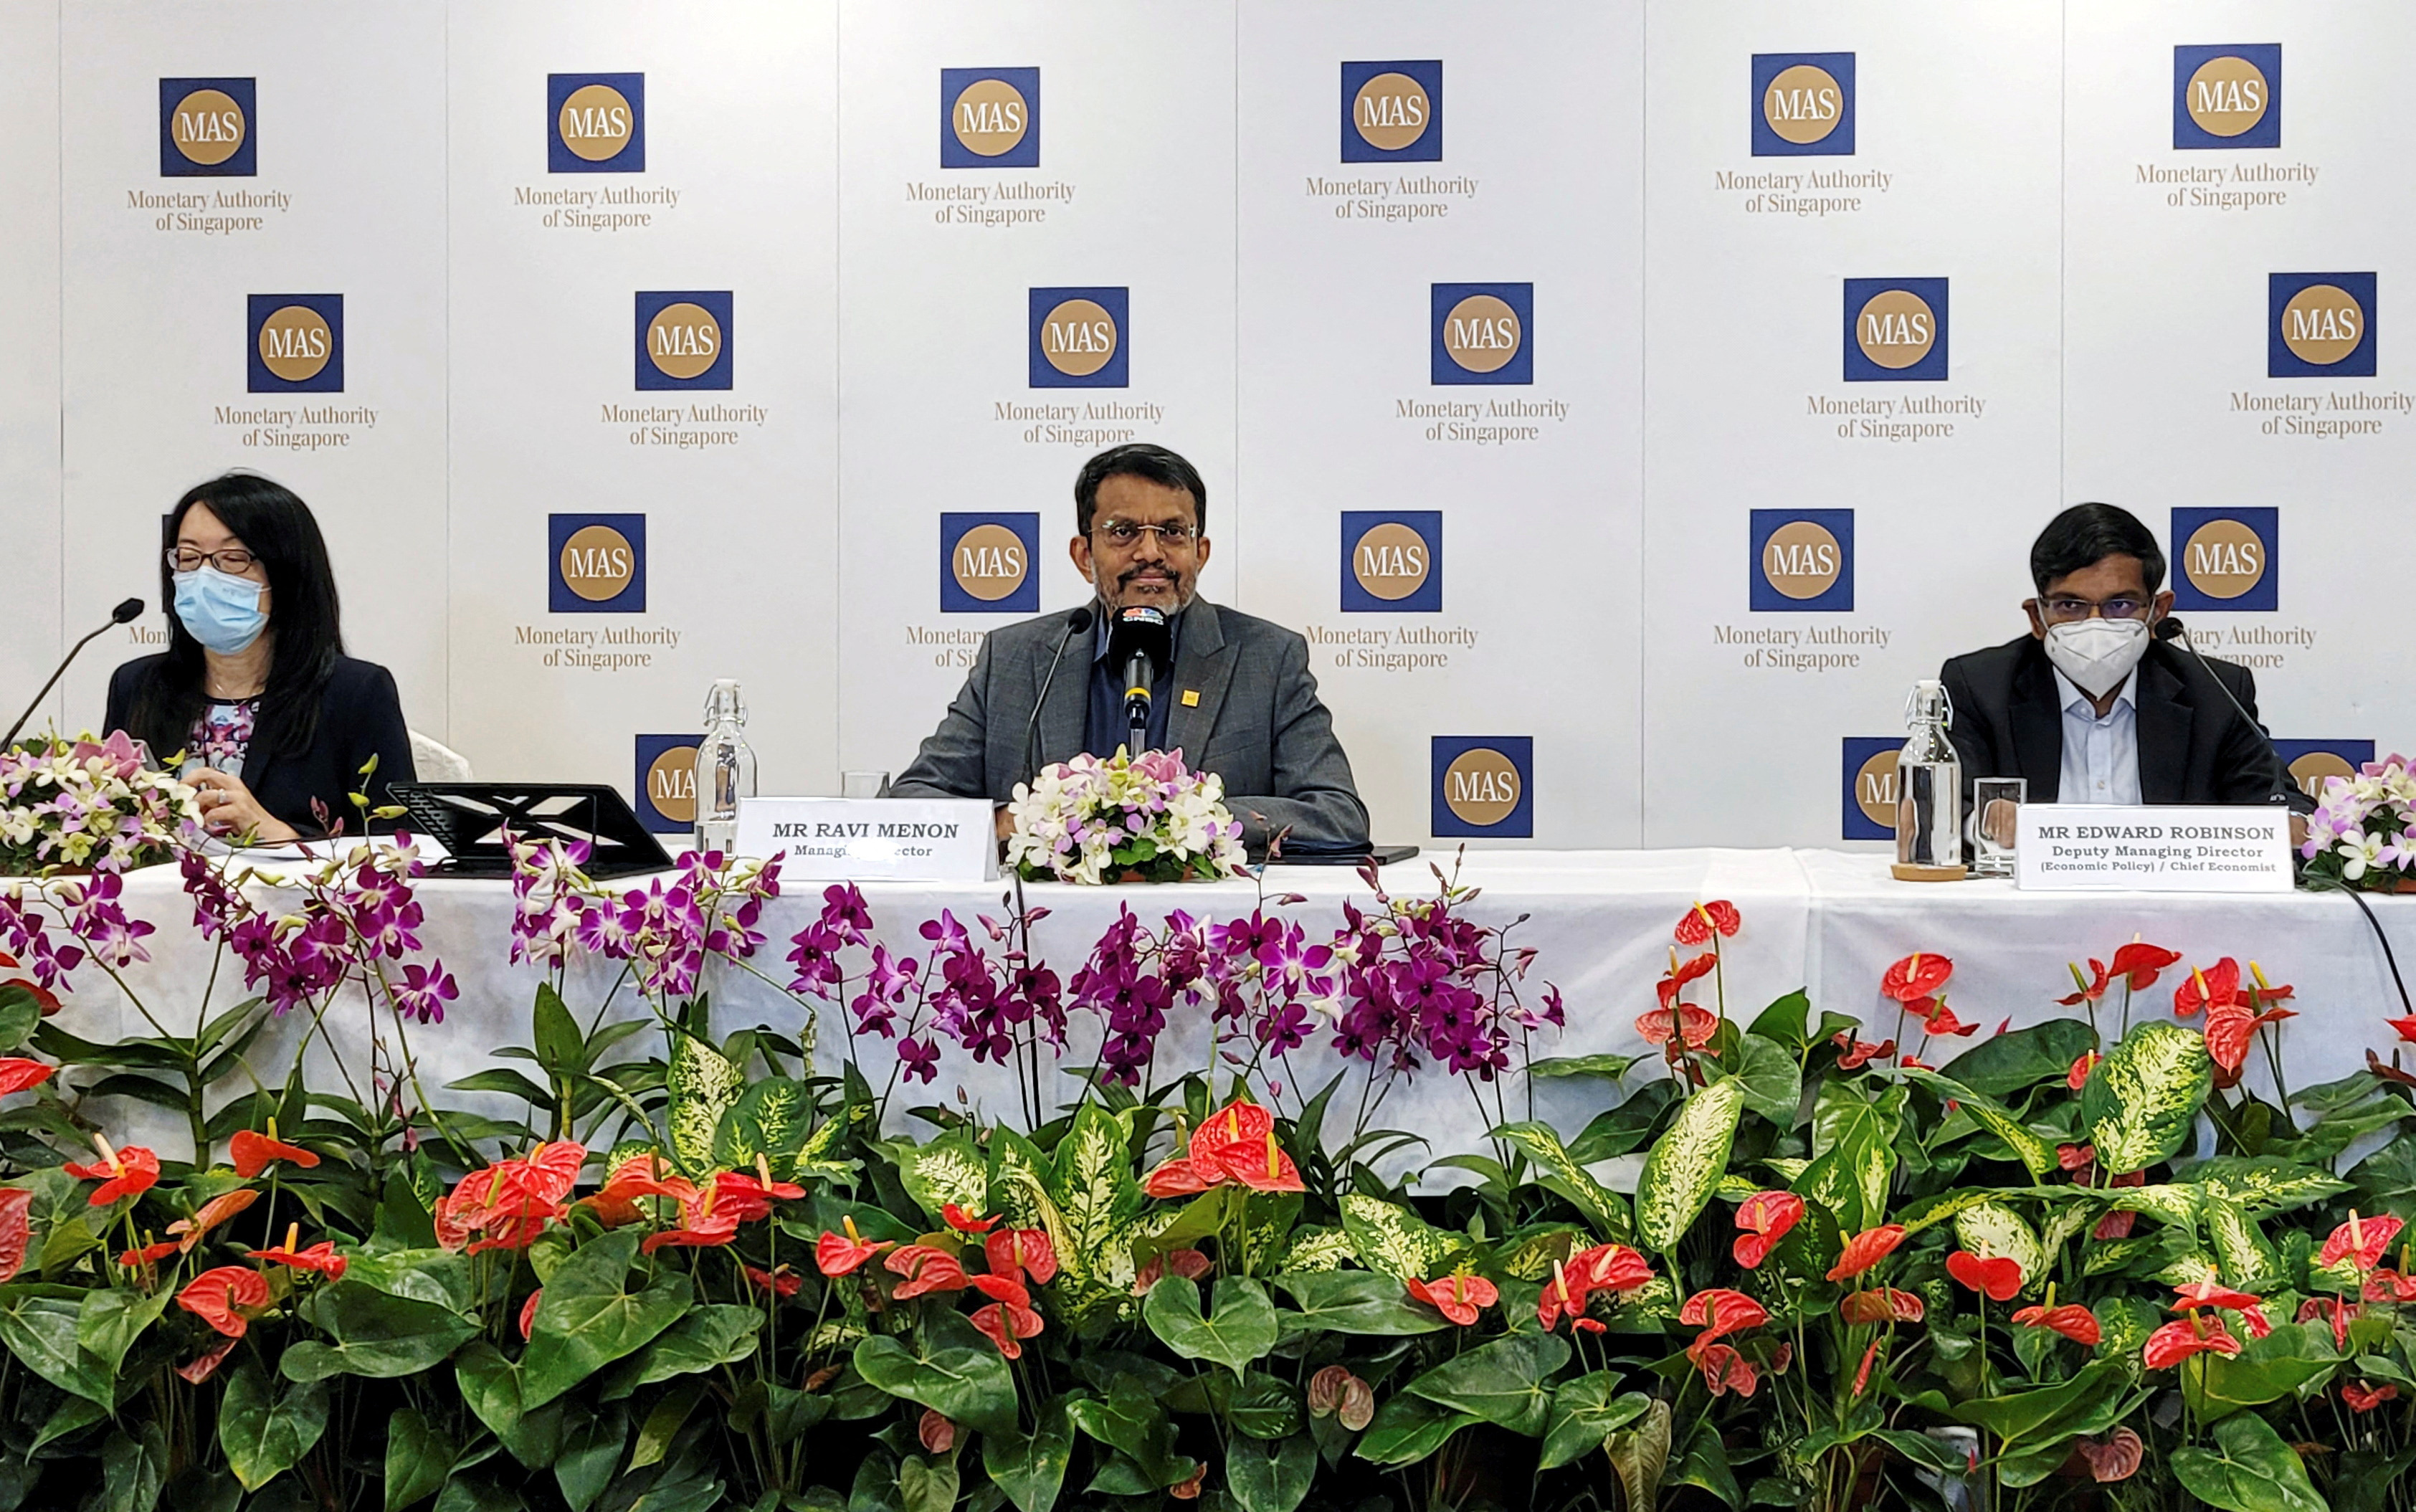 Ravi Menon, the managing director of the Monetary Authority of Singapore, speaks at a news conference in Singapore